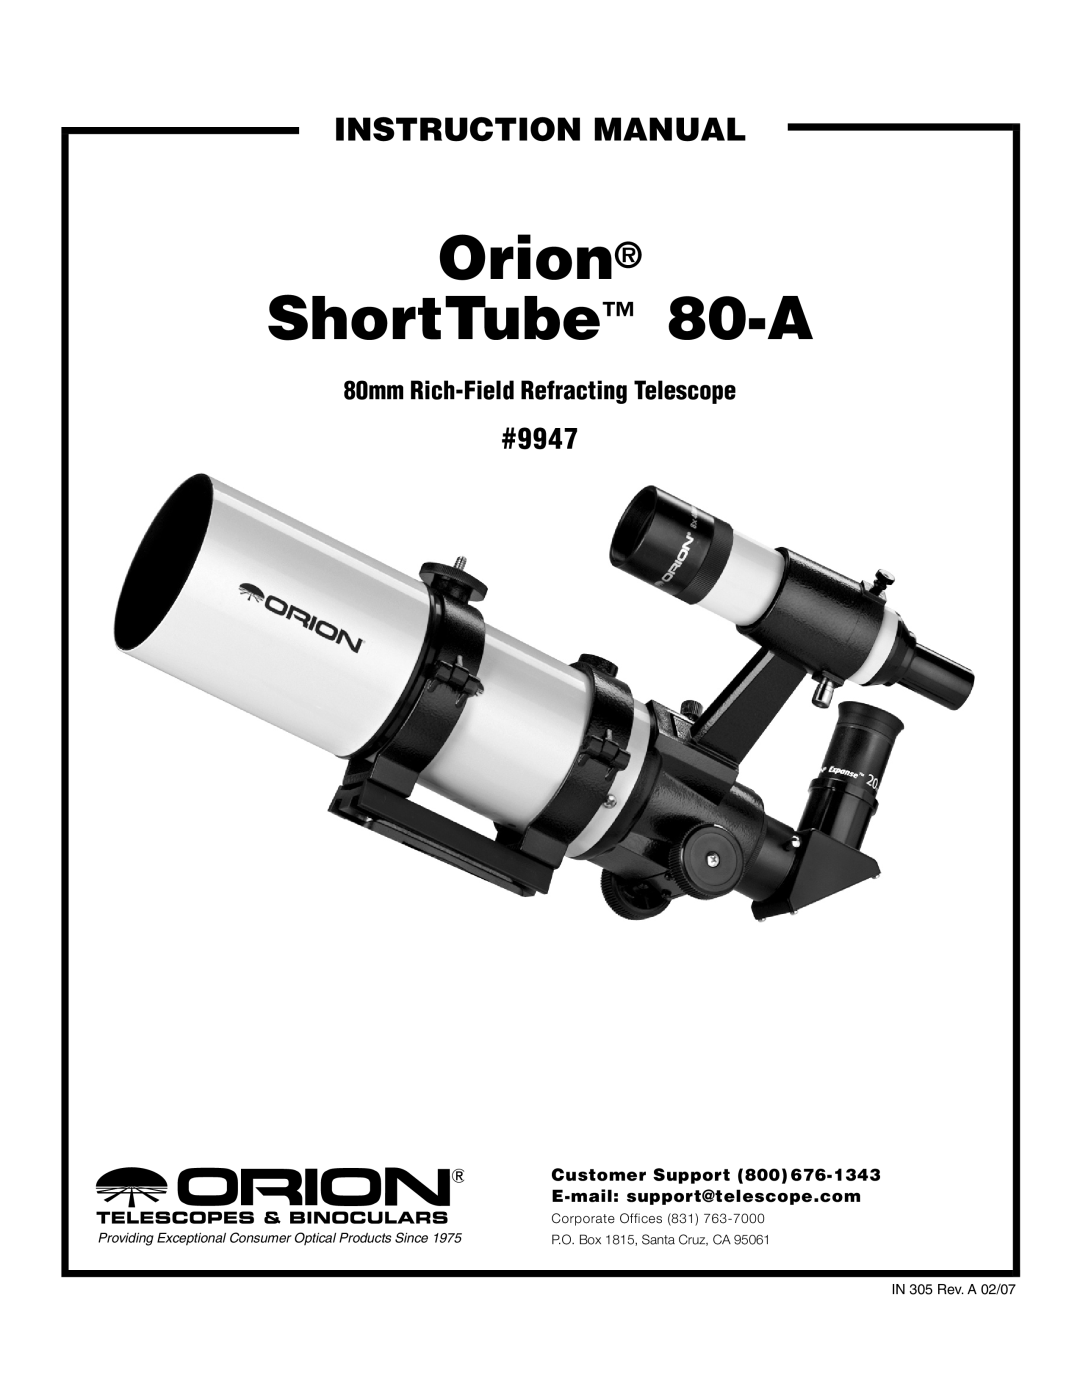 Orion instruction manual #9947, Orion ShortTube 80-A, 80mm Rich-Field Refracting Telescope, Customer Support 